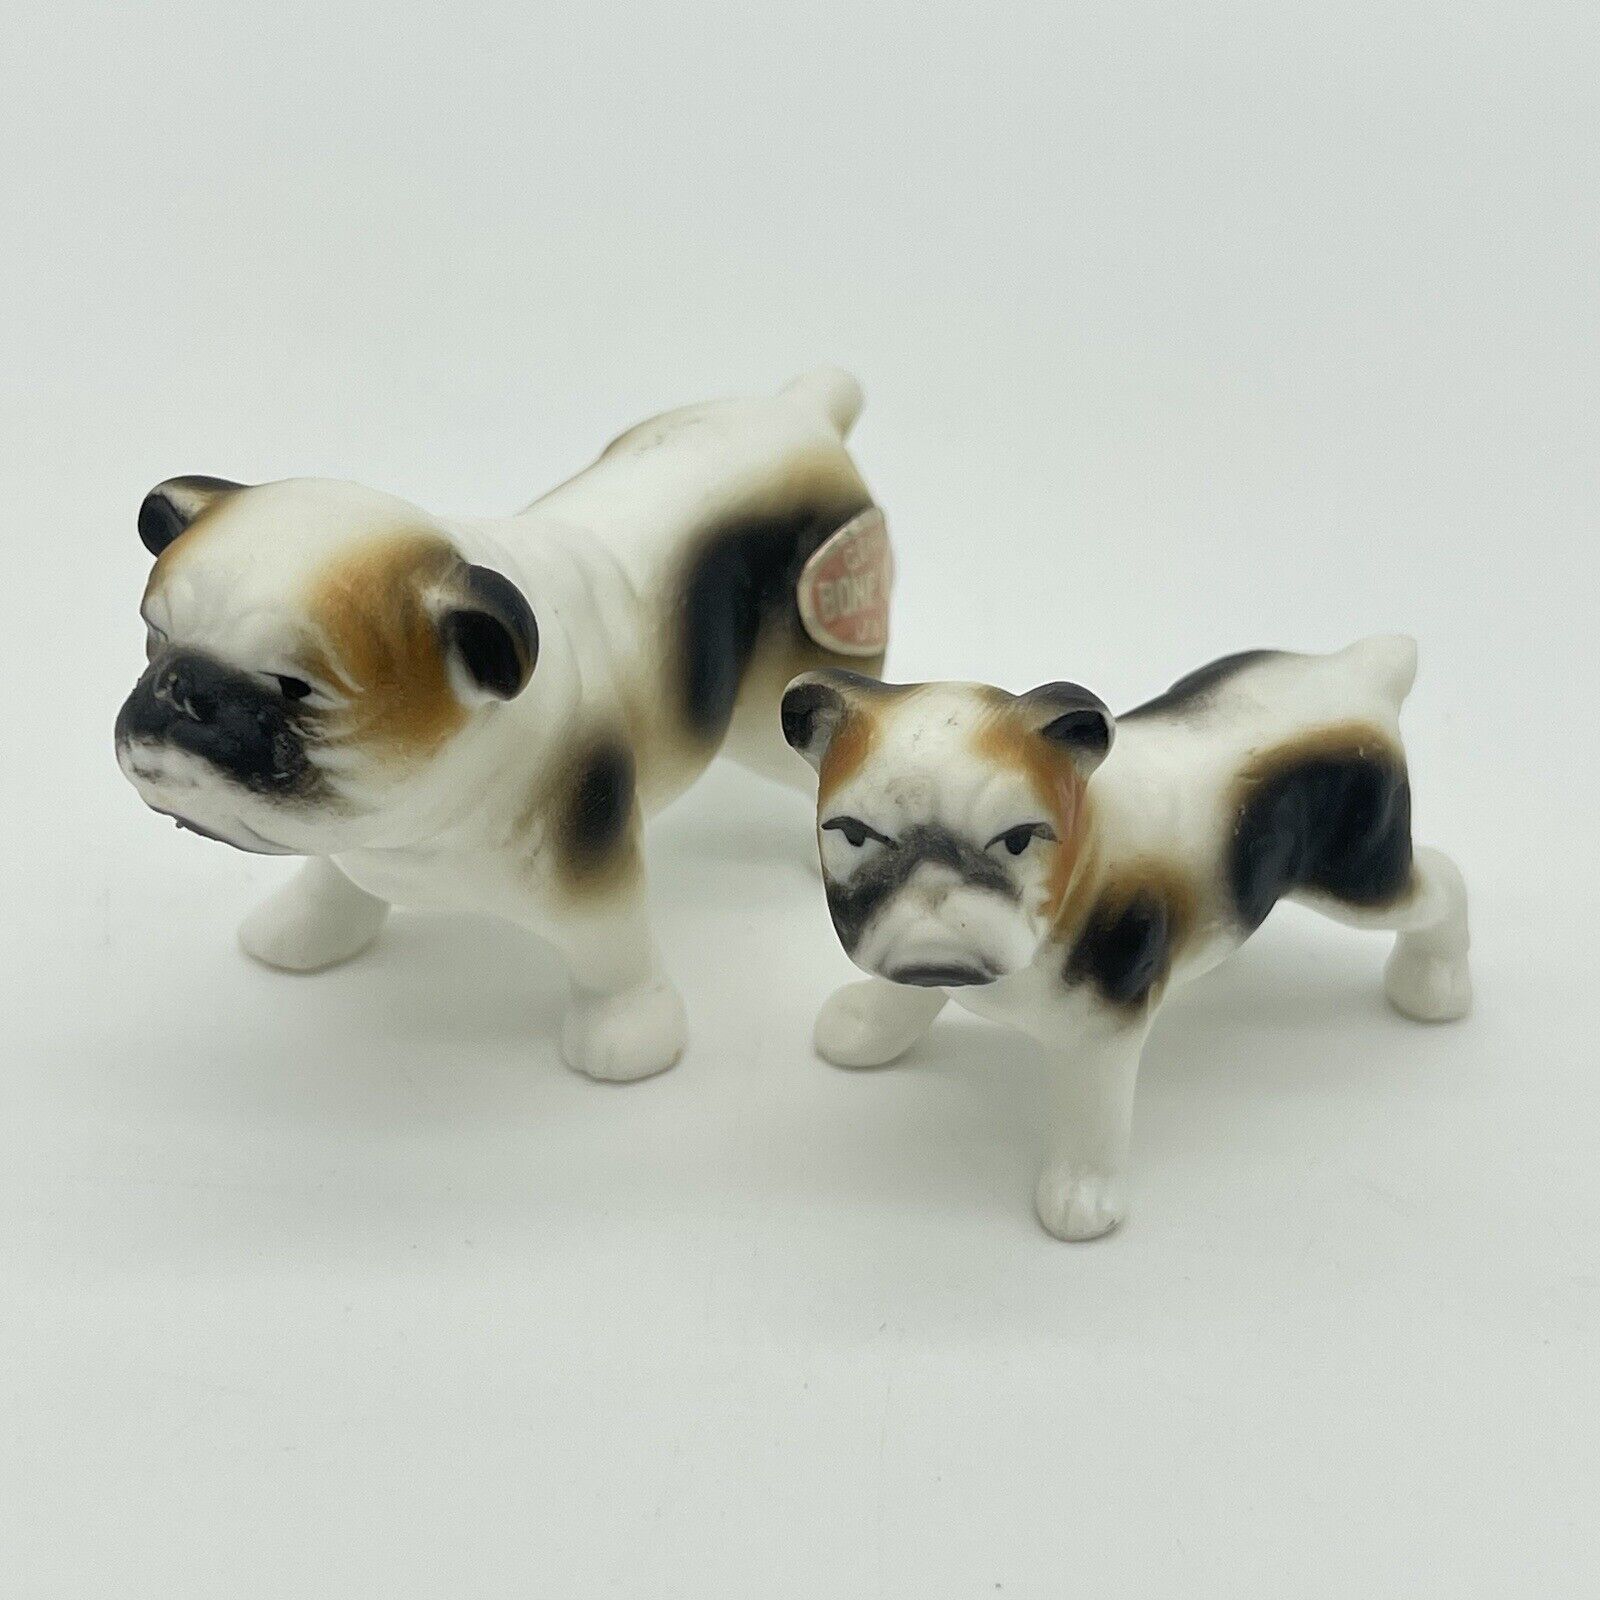 Vintage Bone China Miniatures Set of 2 English Bull Dogs Made in Japan